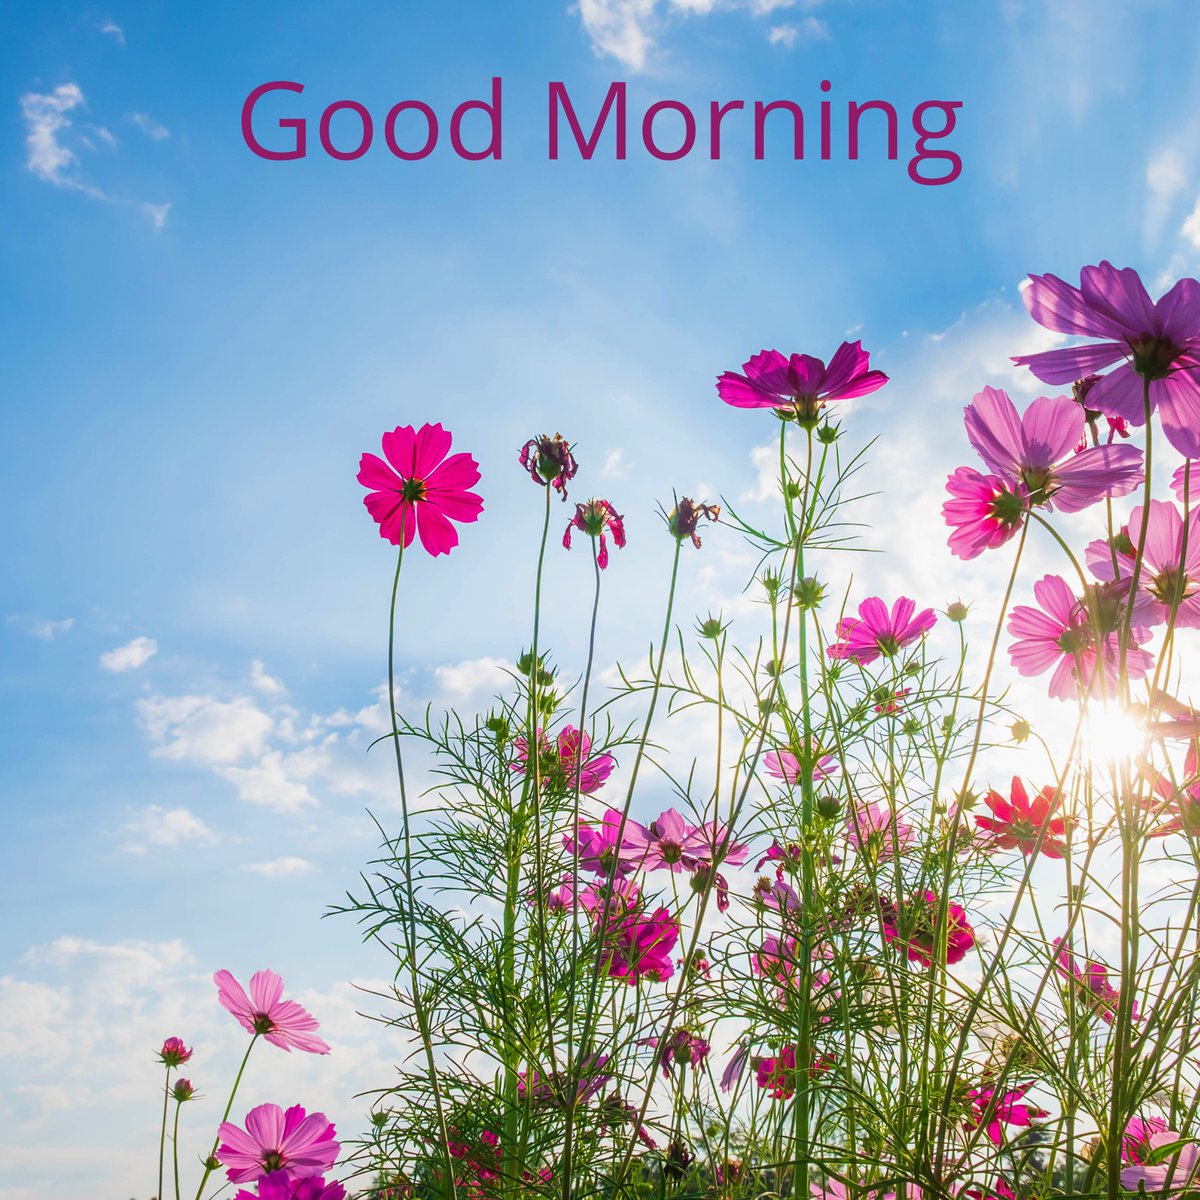 It's a new day, a fresh start, and an opportunity to make a positive impact. Let's spread kindness, love, and positivity wherever we go. #Greetings #SocialMediaPals #NewDay #FreshStart #PositiveImpact #SpreadKindness